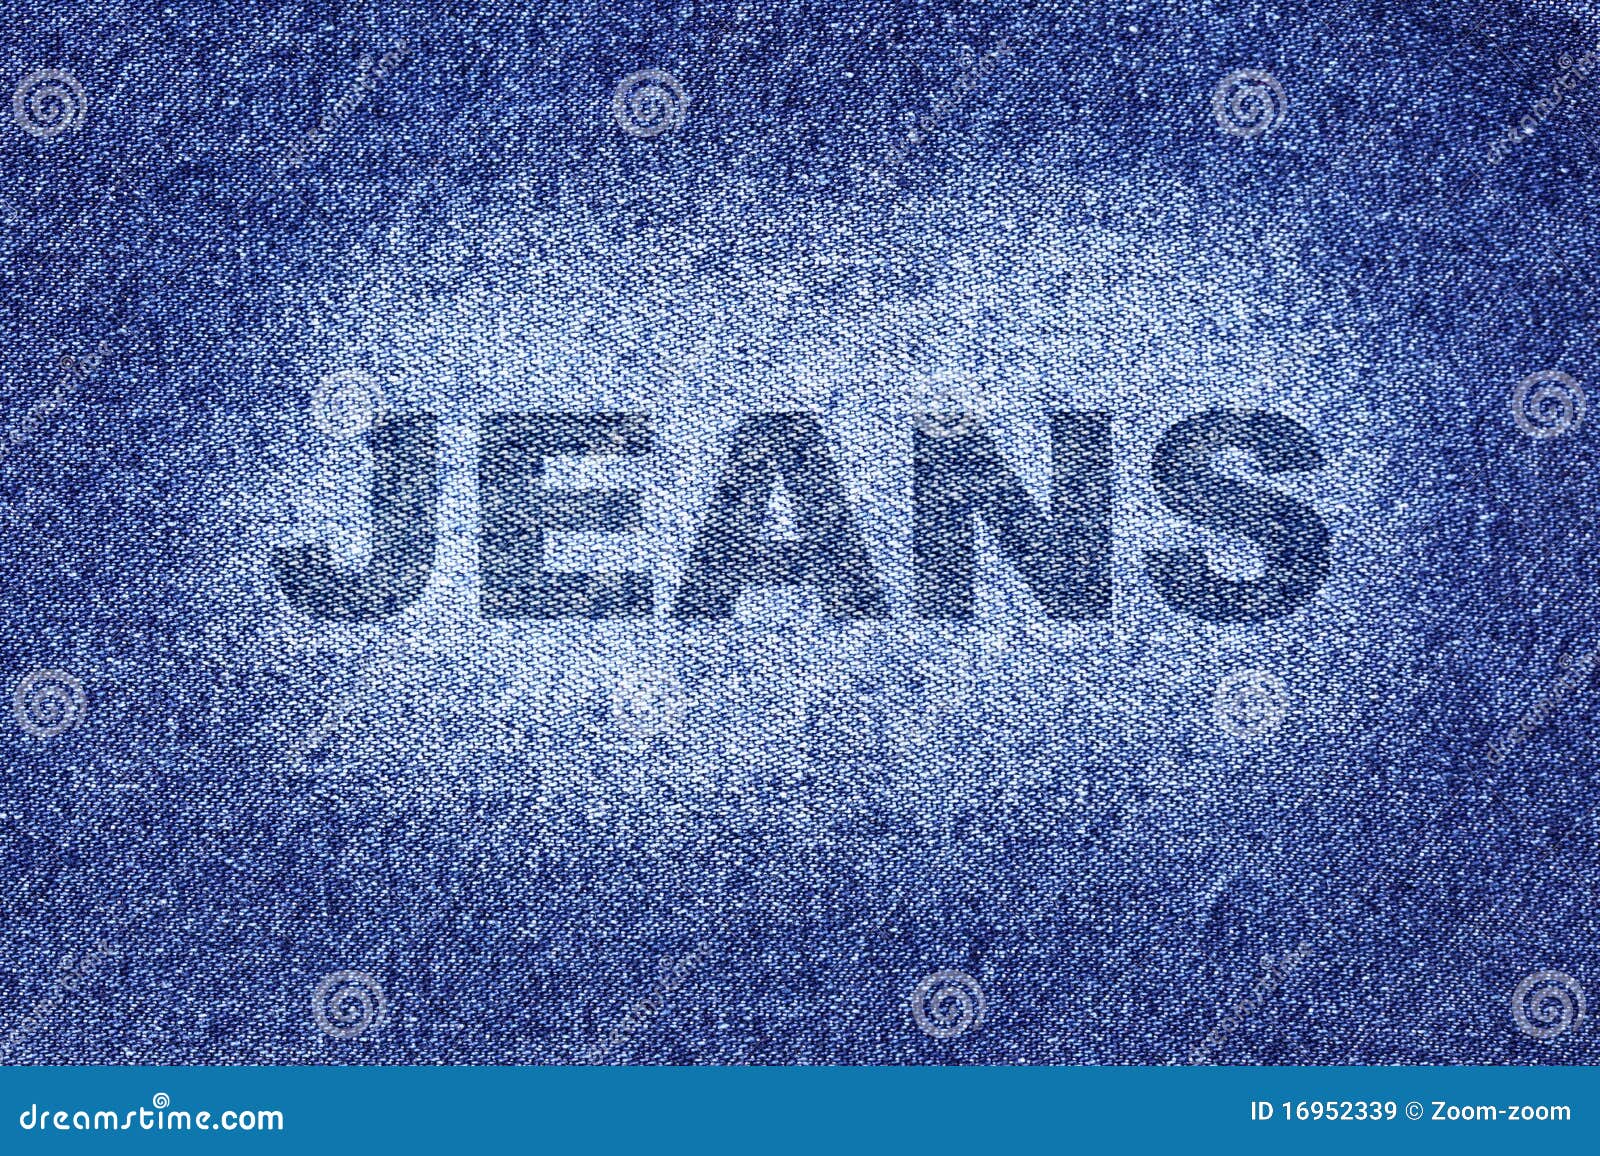 Jeans stock image. Image of copy, dress, jeans, border - 16952339